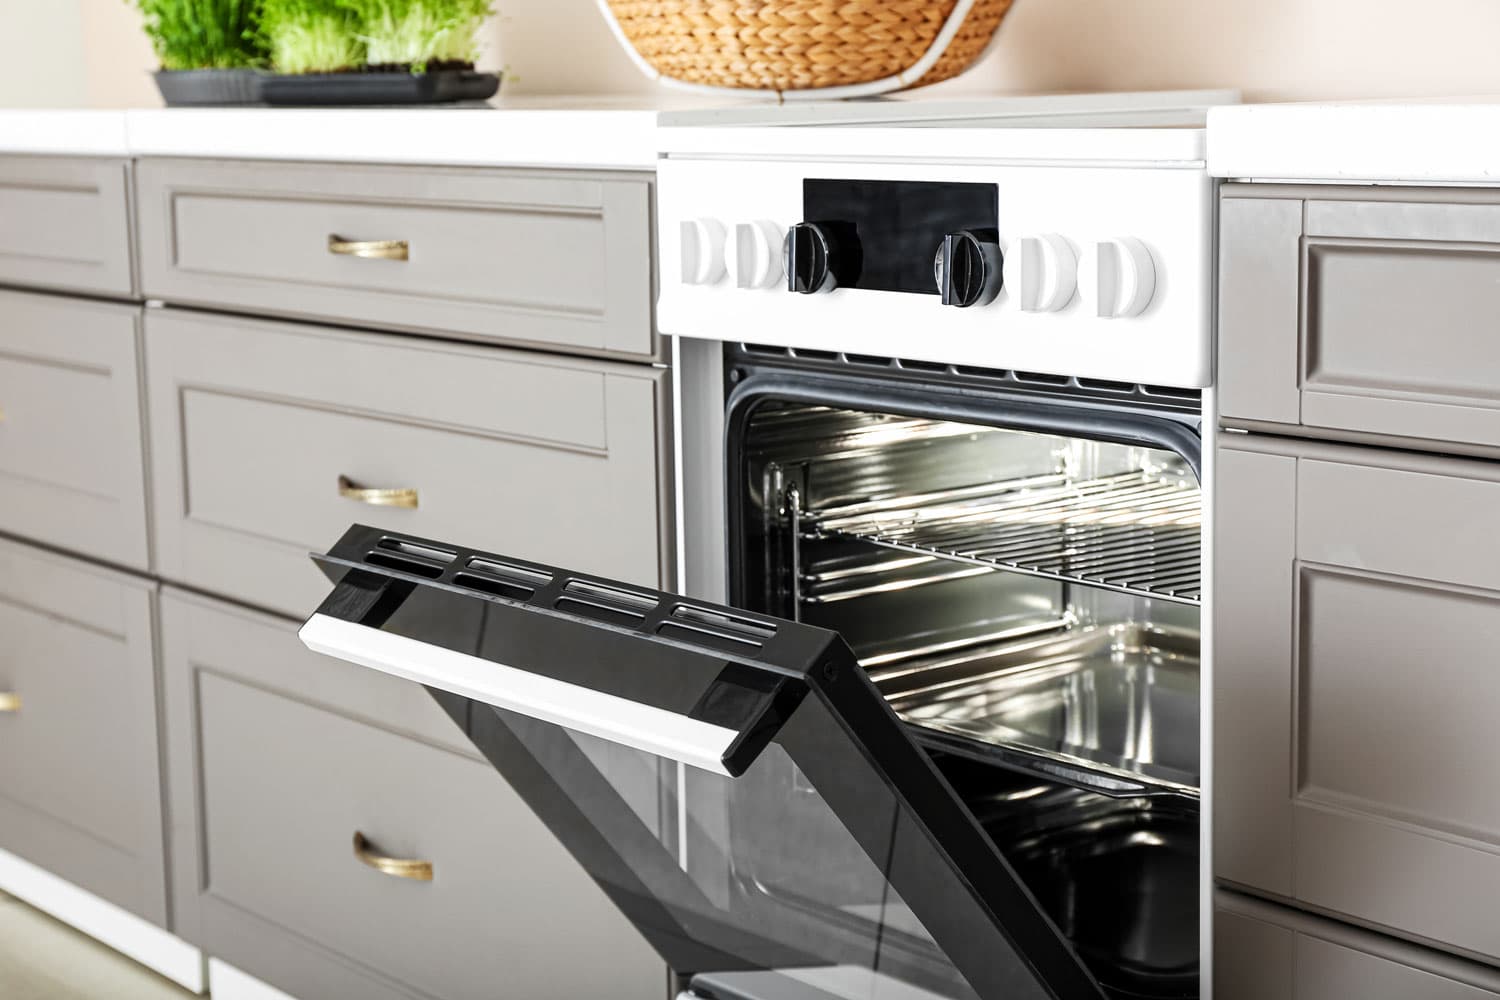 Modern electric oven in kitchen
